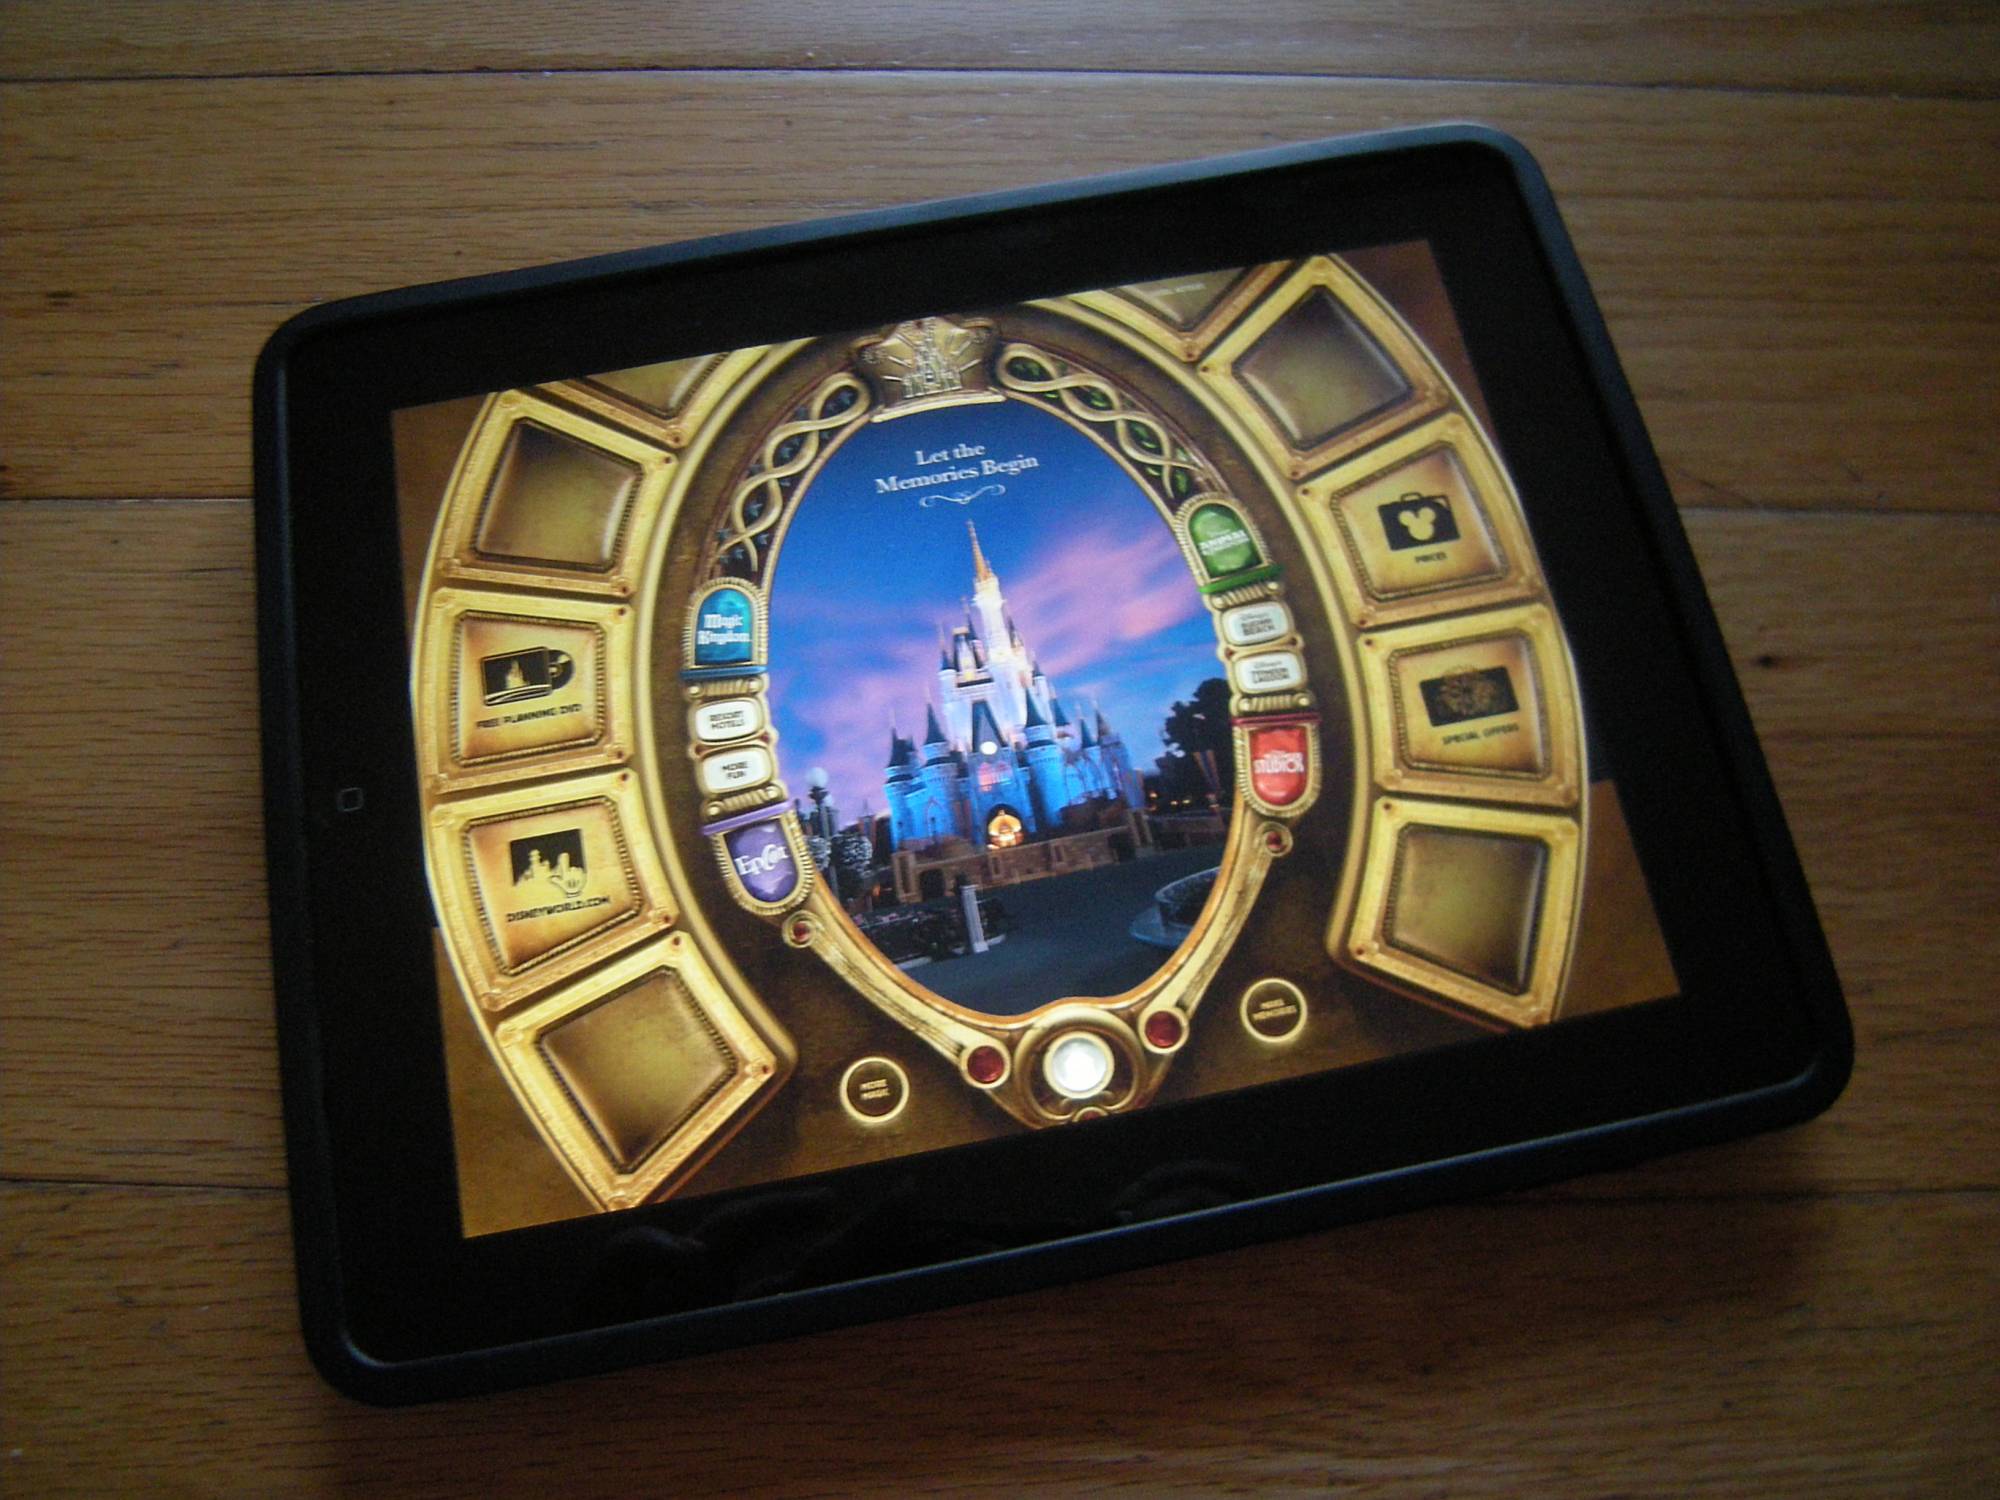 Discover which apps can help make planning your Walt Disney World vacation easier |PassPorter.com